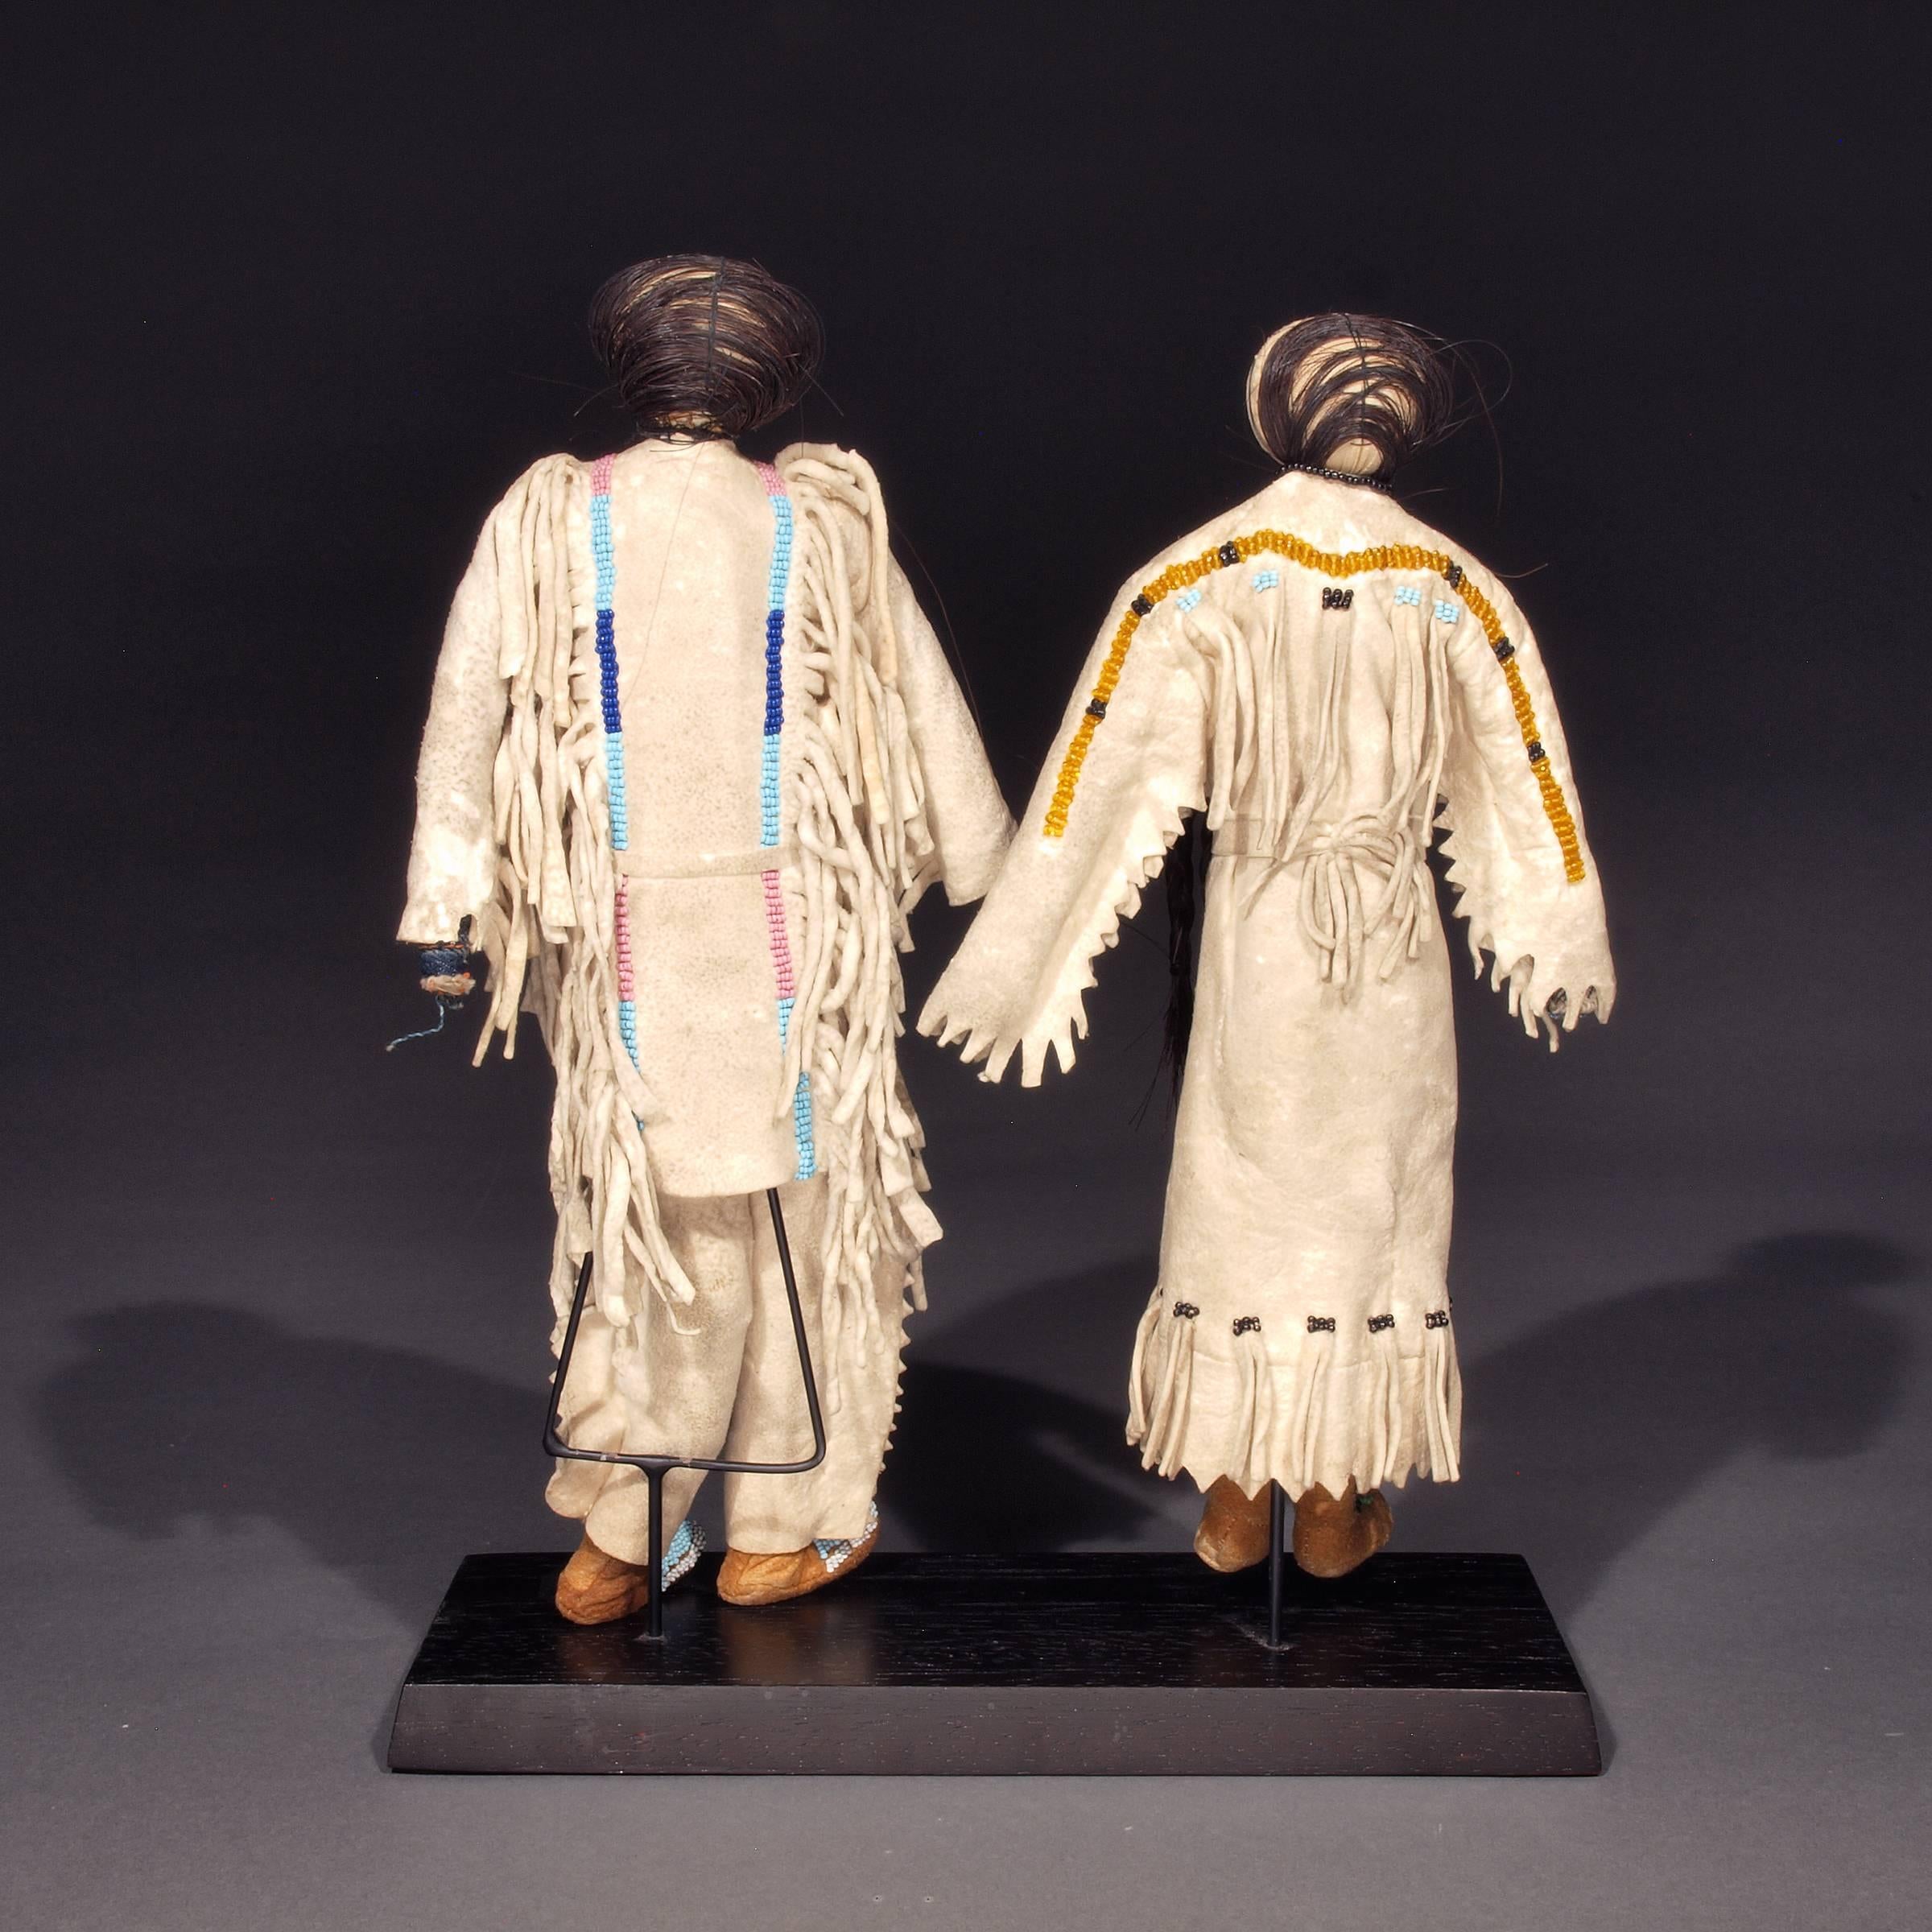 A rare pair of American Indian dolls. Constructed of native tanned hide, sewn with sinew and adorned with decorative glass trade beads and horse hair. A nomadic tribe, the Sioux are associated with areas of the Great Plains of the United States